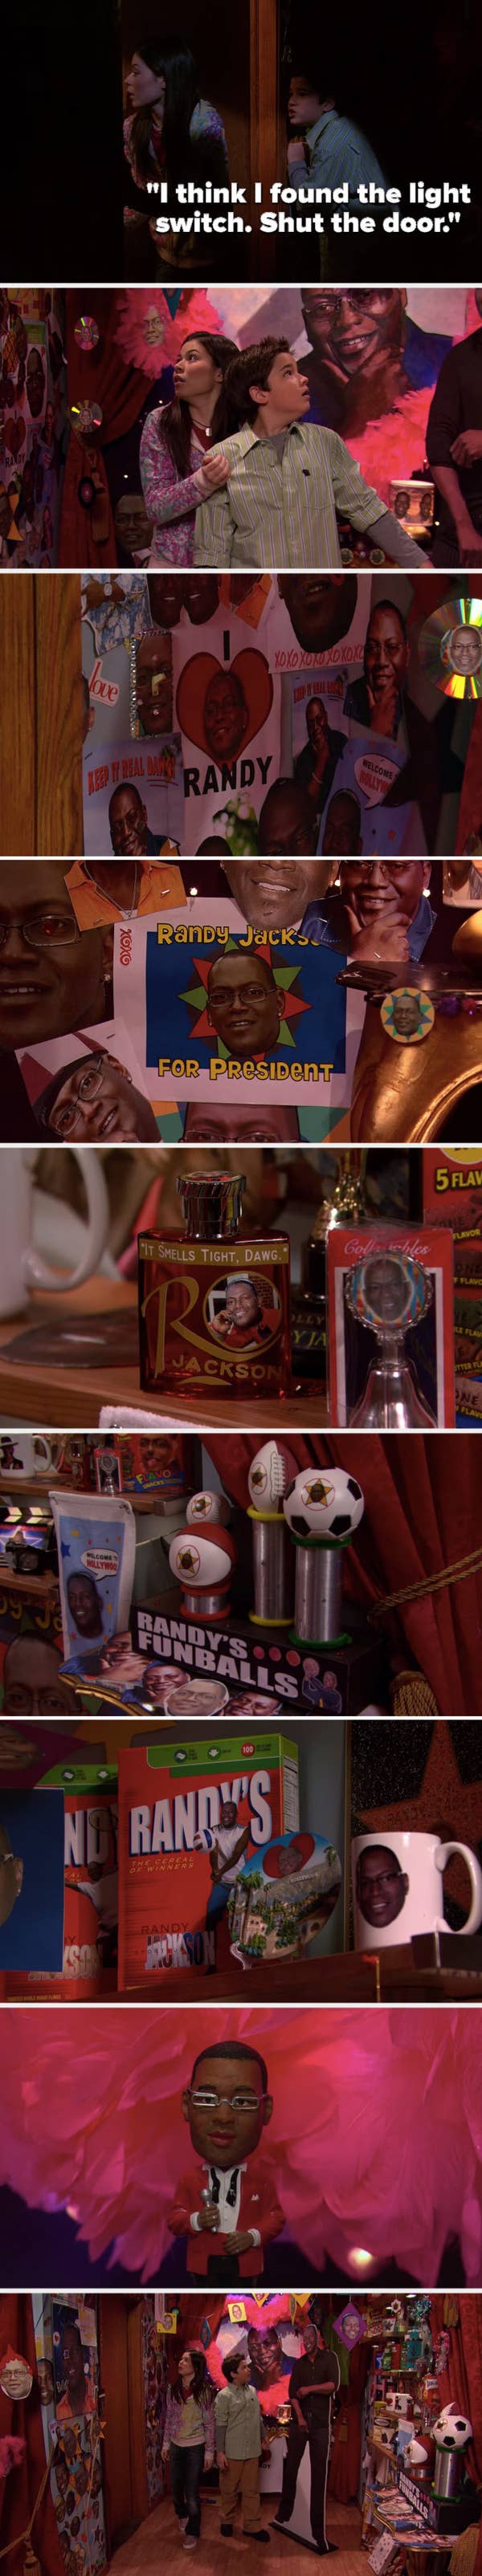 Freddie says, &quot;I think I found the light switch. Shut the door,&quot; and he and Carly realize they're in a closet full of pictures of Randy Jackson and Randy Jackson paraphernalia